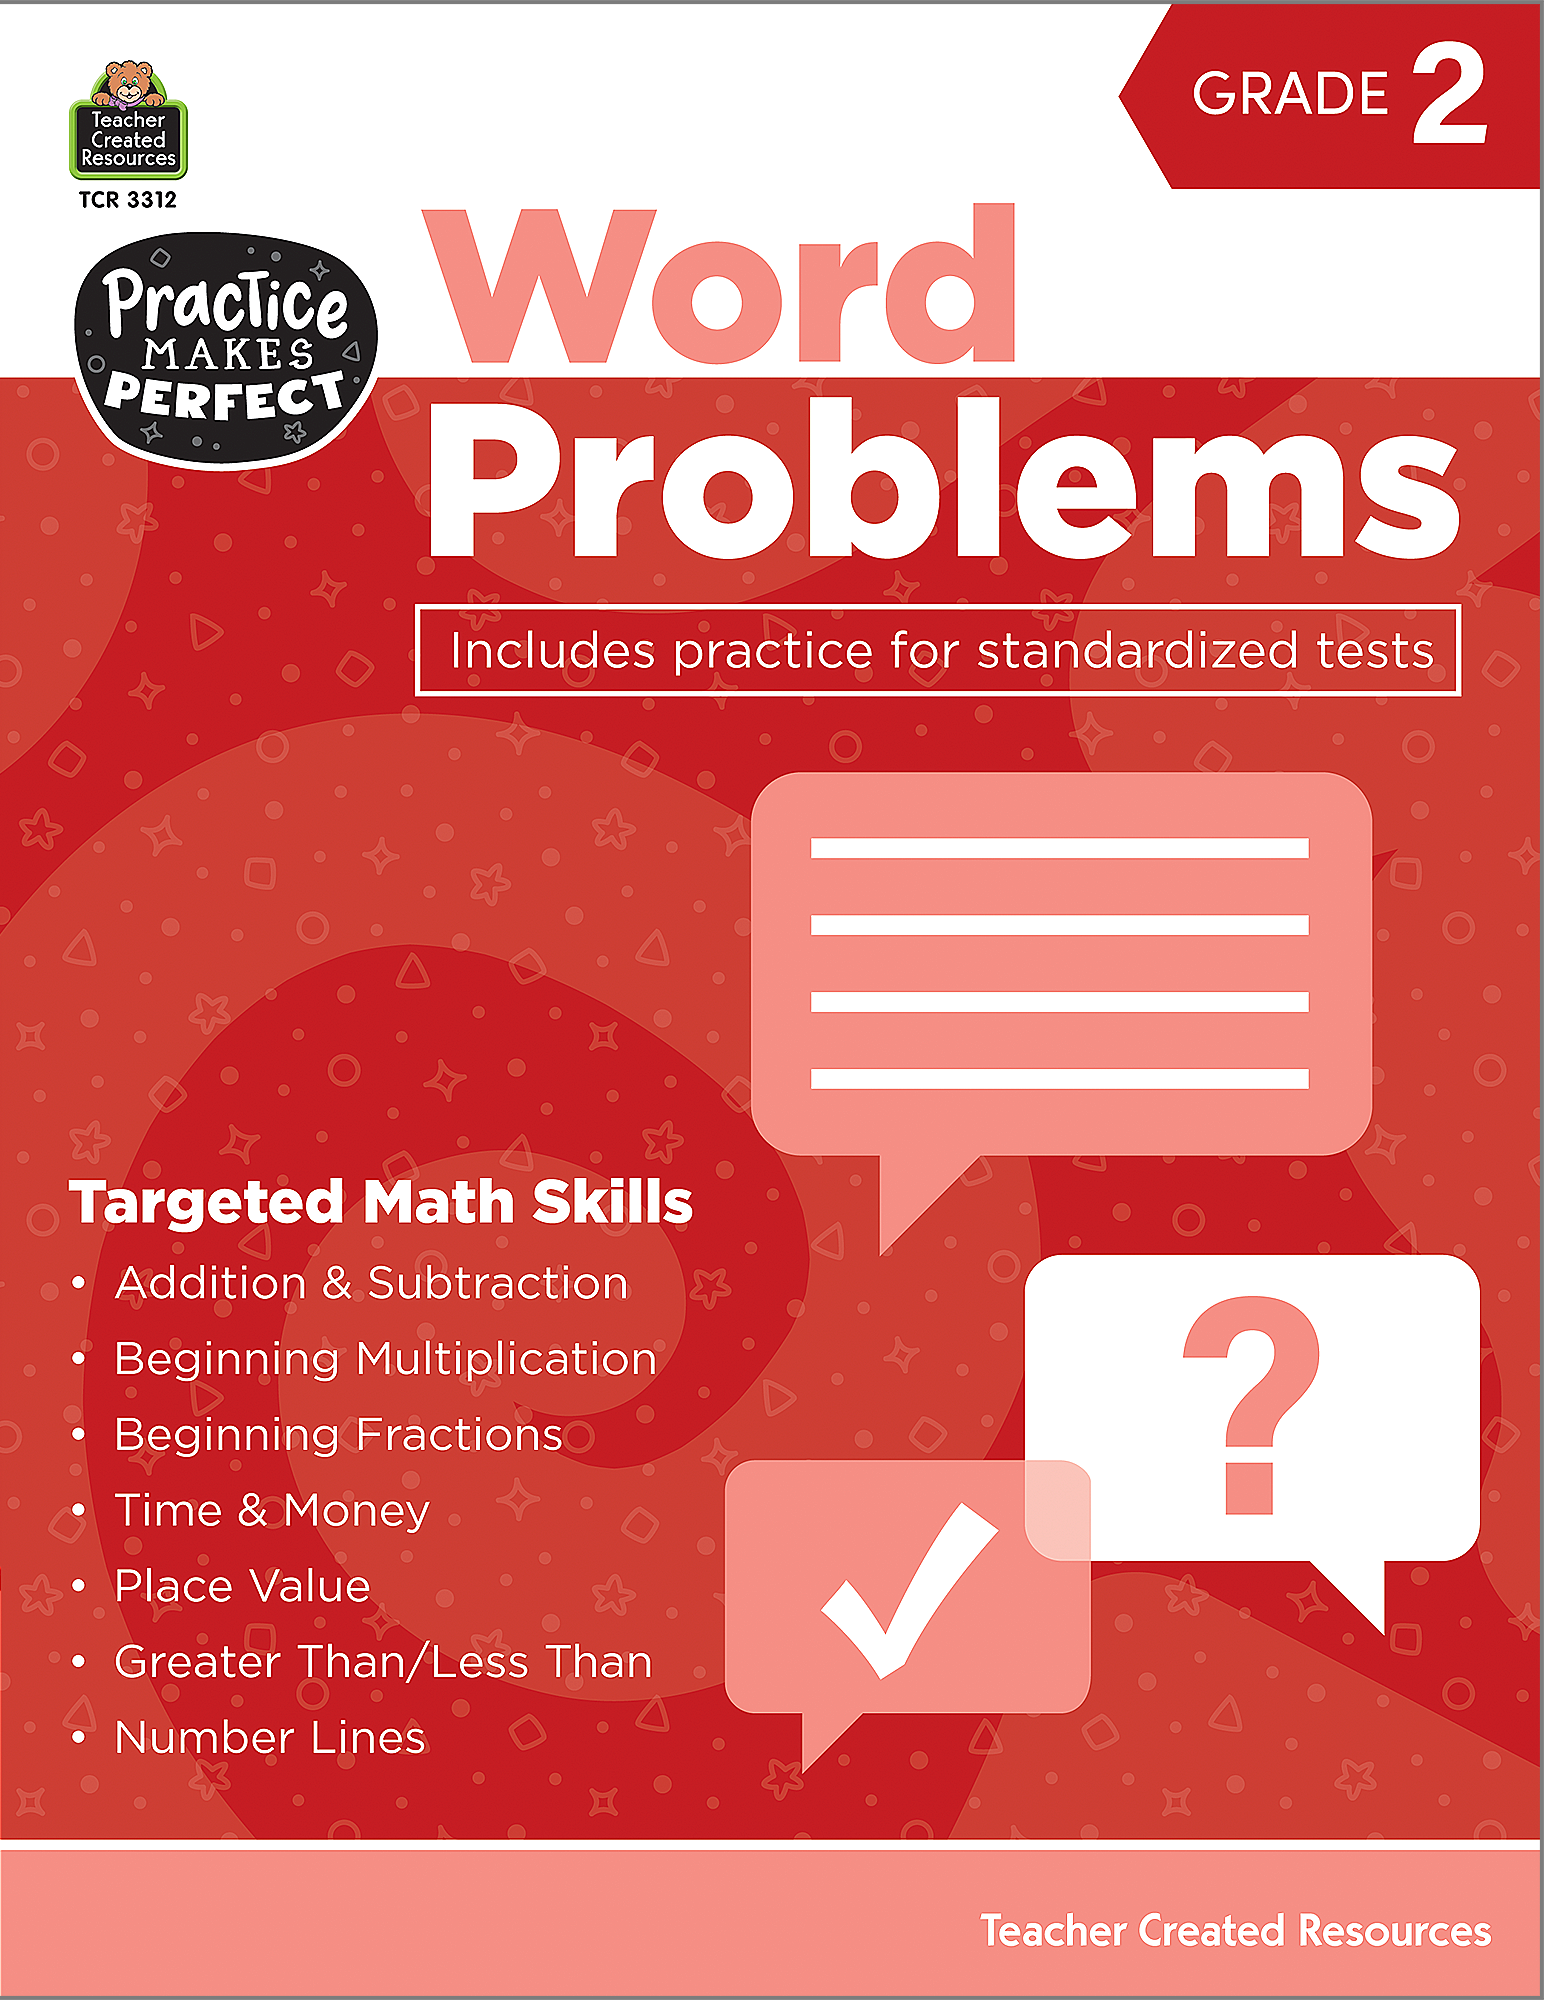 Word Problems Grade 2 - TCR3312 | Teacher Created Resources